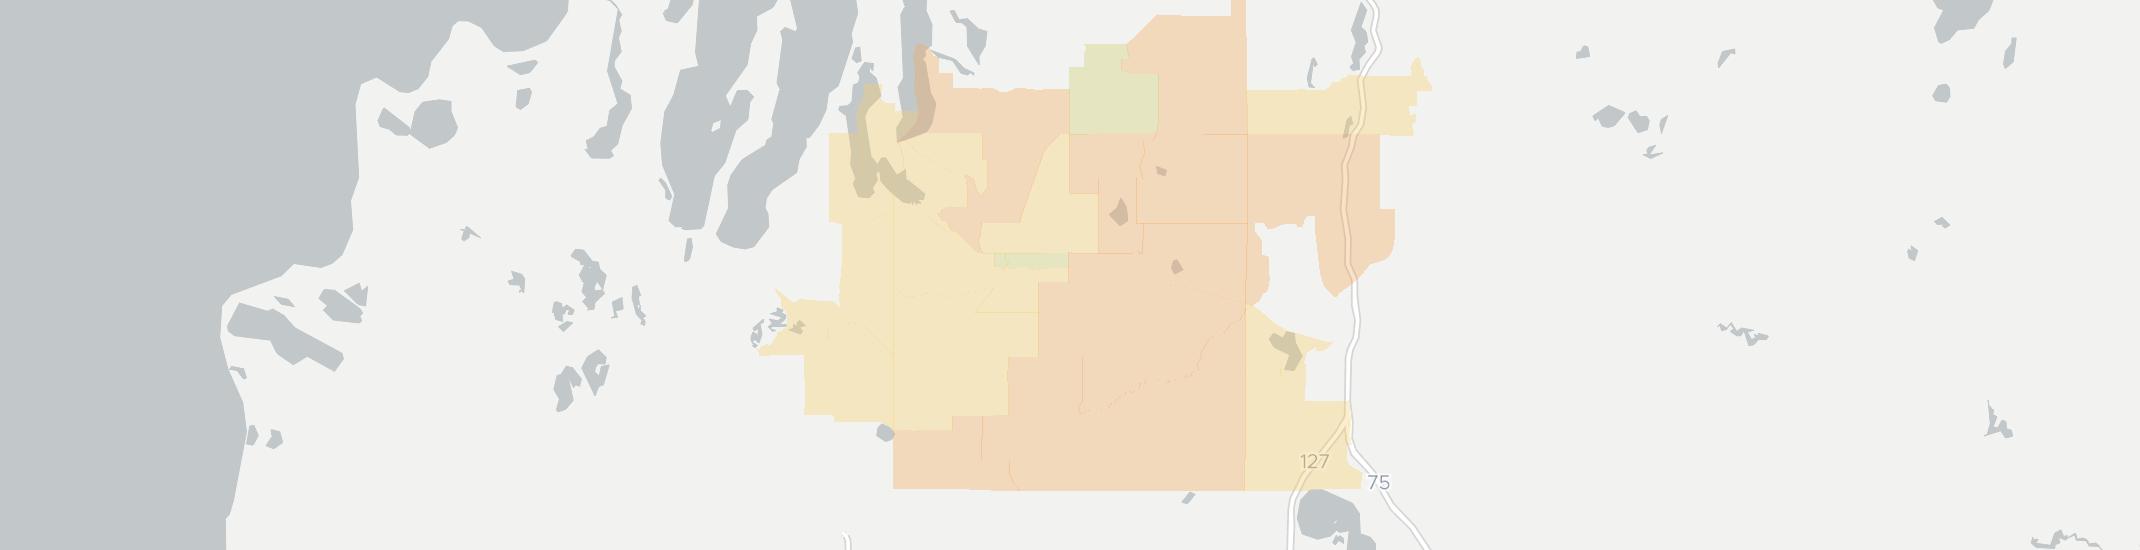 Kalkaska Internet Competition Map. Click for interactive map